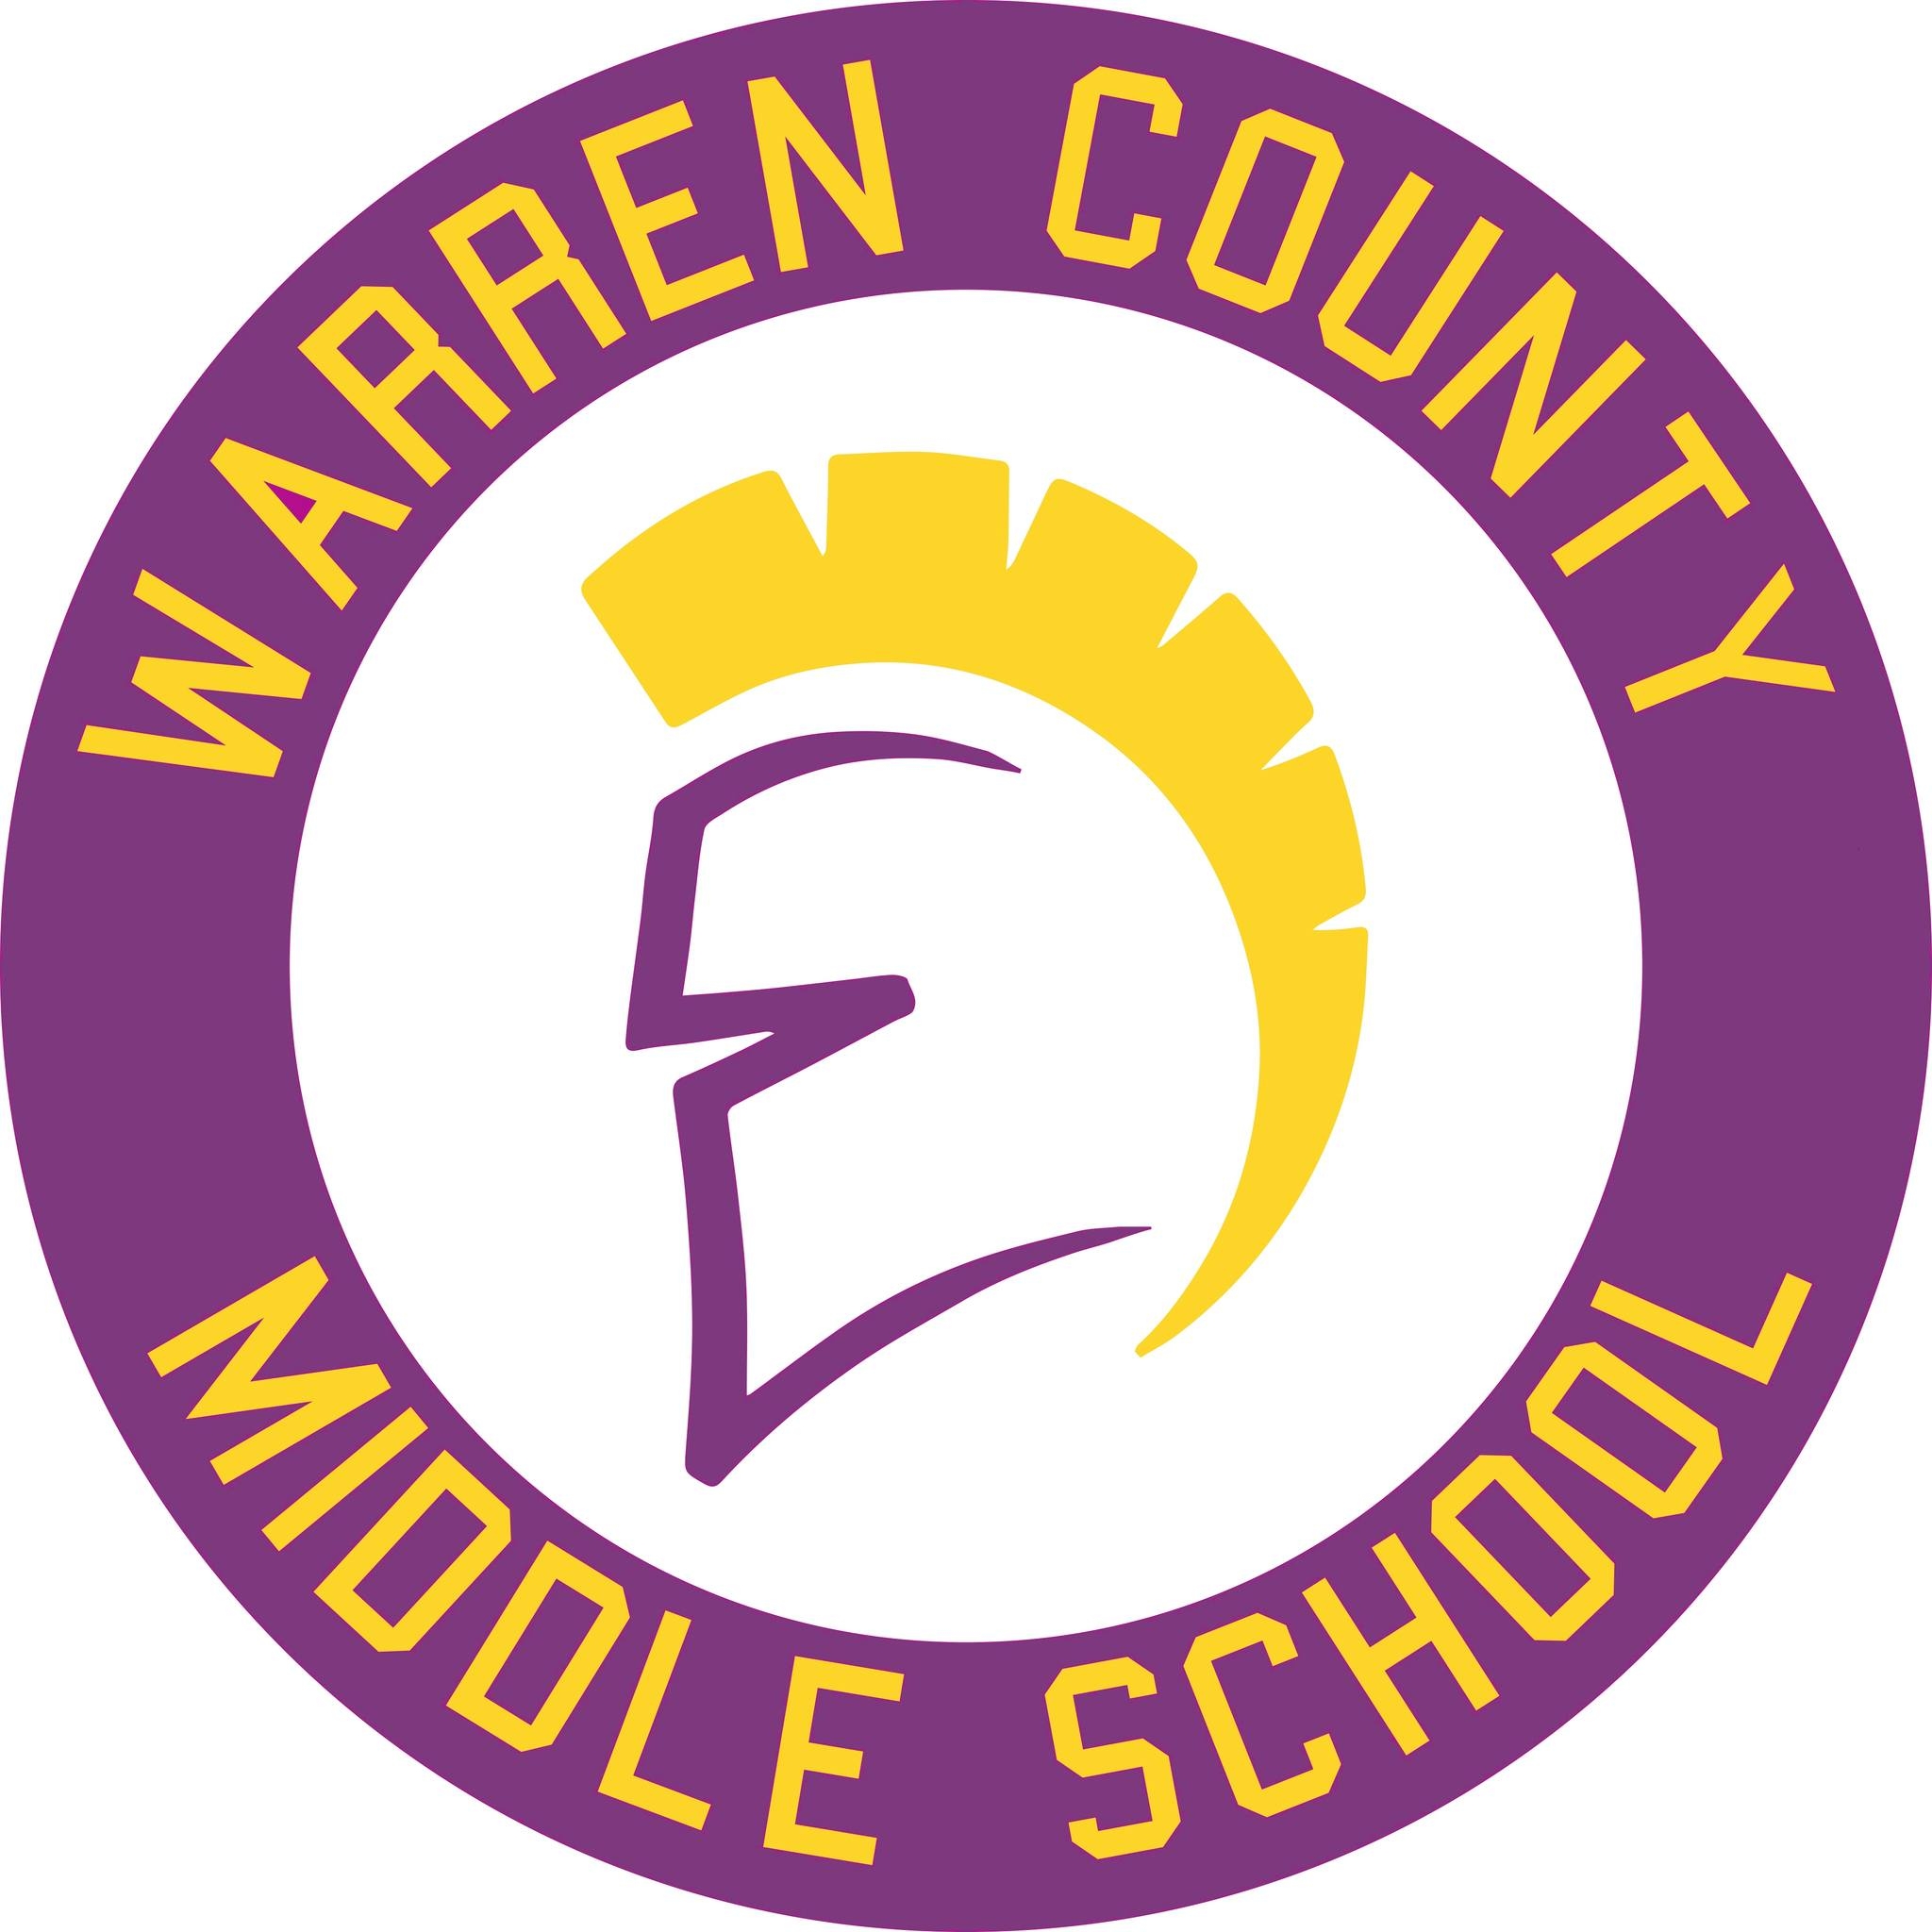 Image of a warrior helmet with gold mohawk down the back. Text: Warren County Middle School